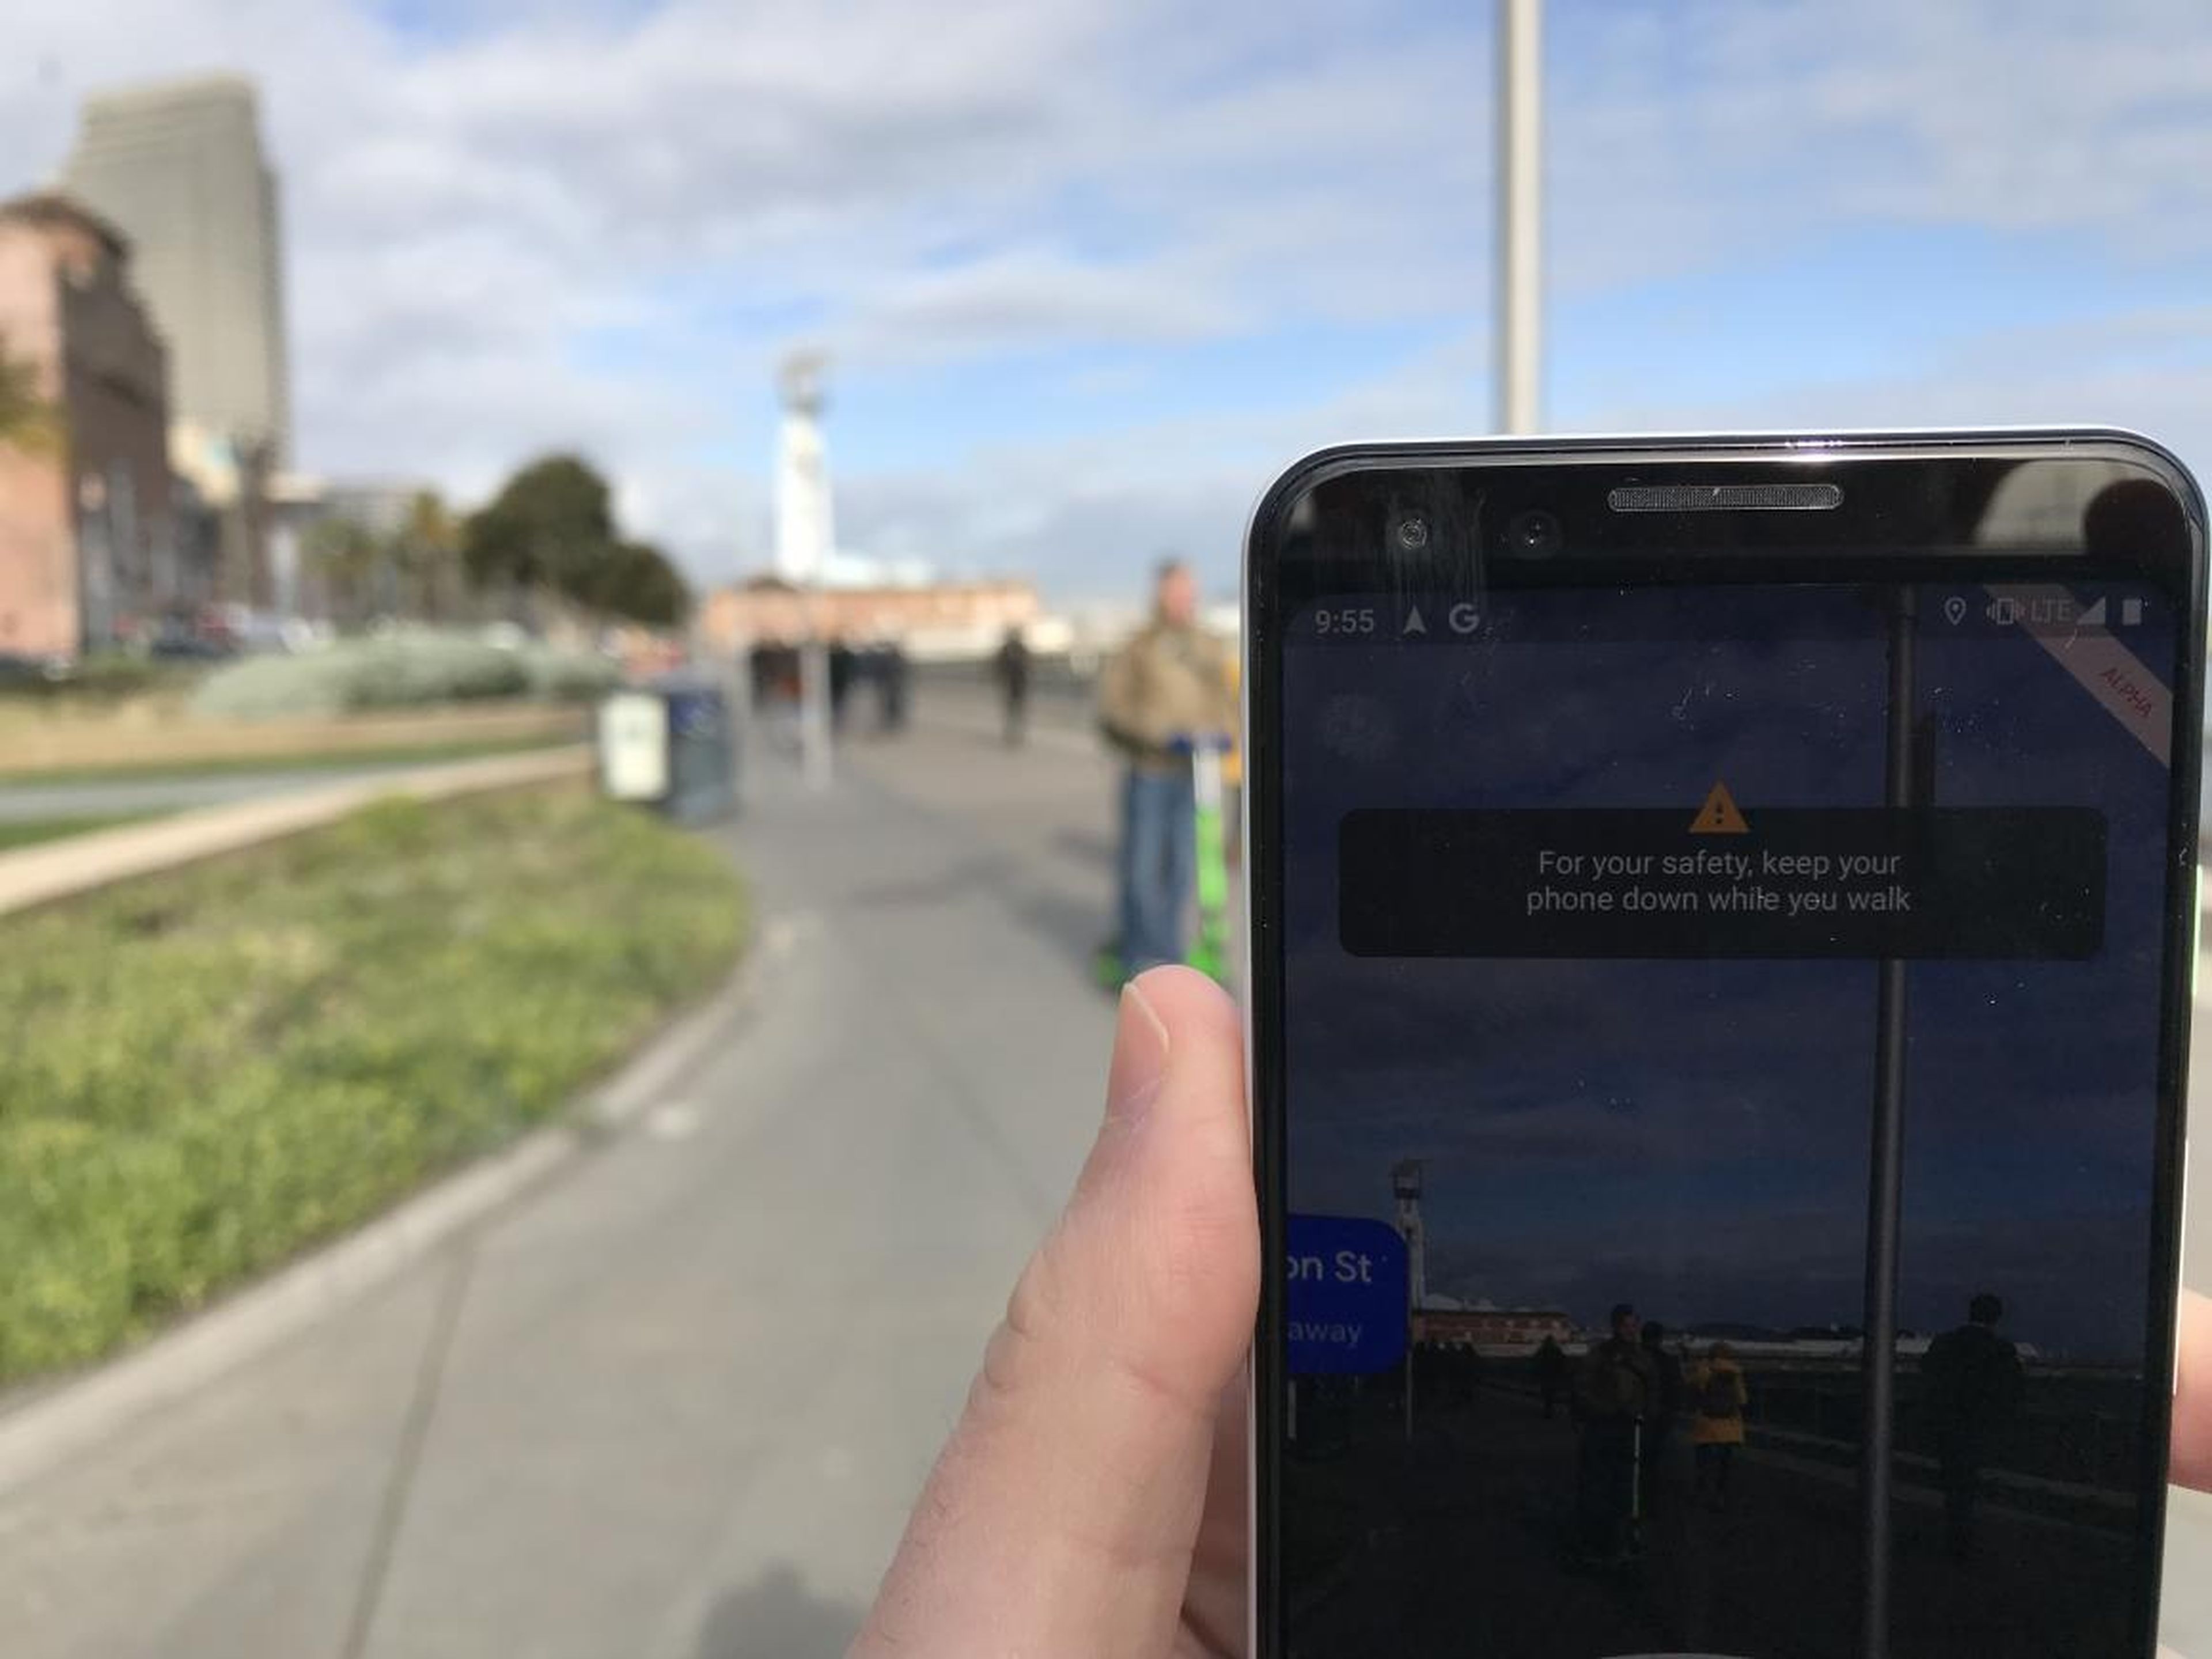 But I wasn't able to hold the phone up for too long. For safety purposes, an alert pops up after a few moments of using the AR feature, telling users to put their phones down while they walk.